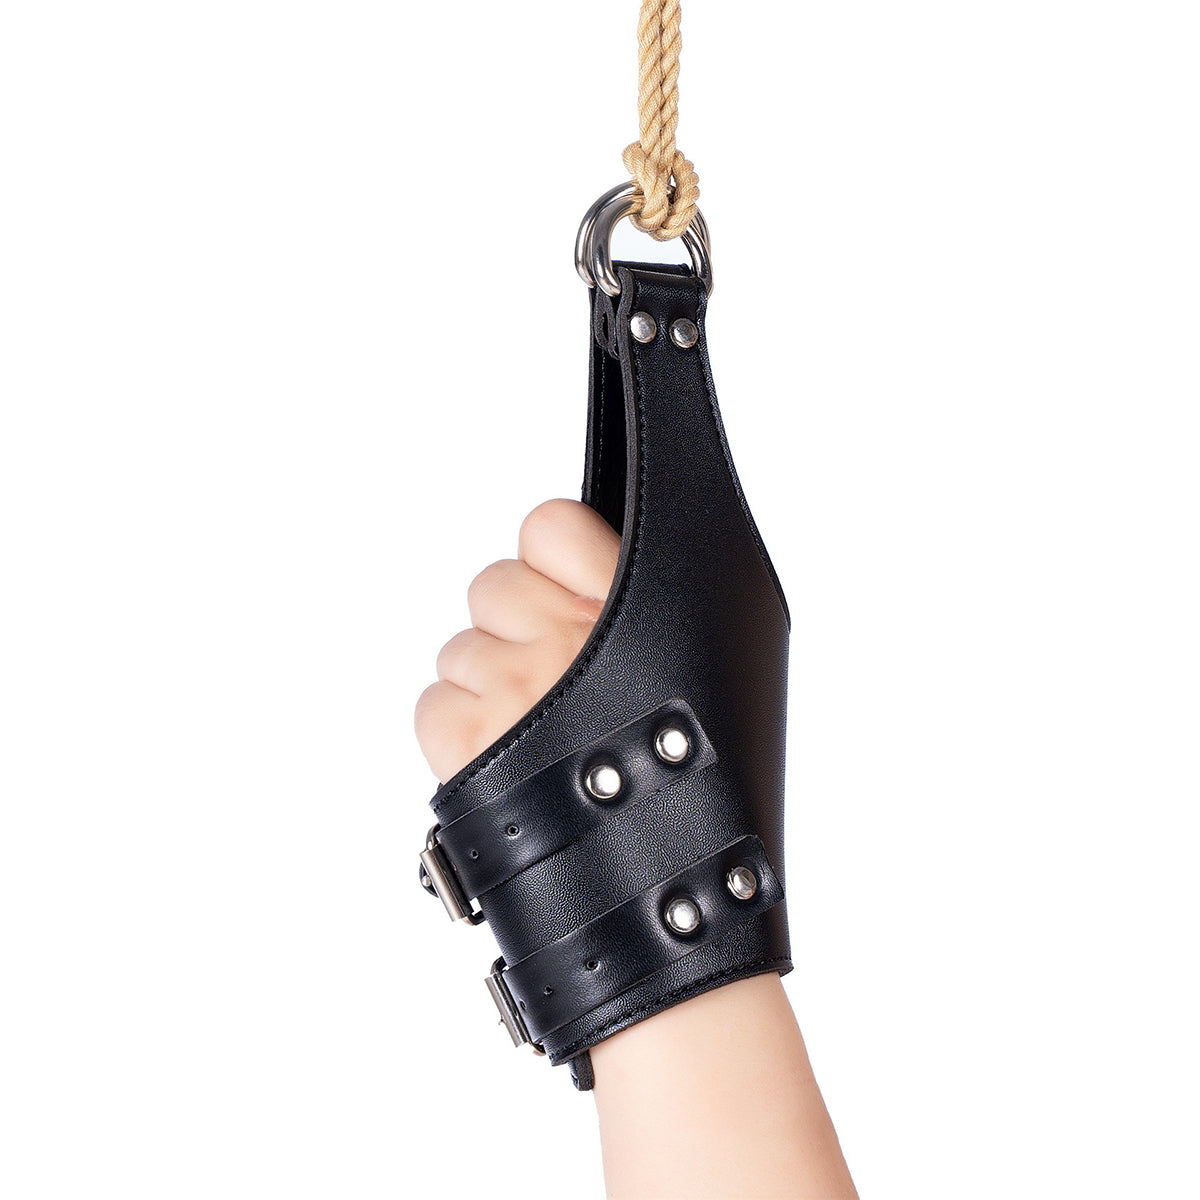 Leather Handcuffs for Suspension